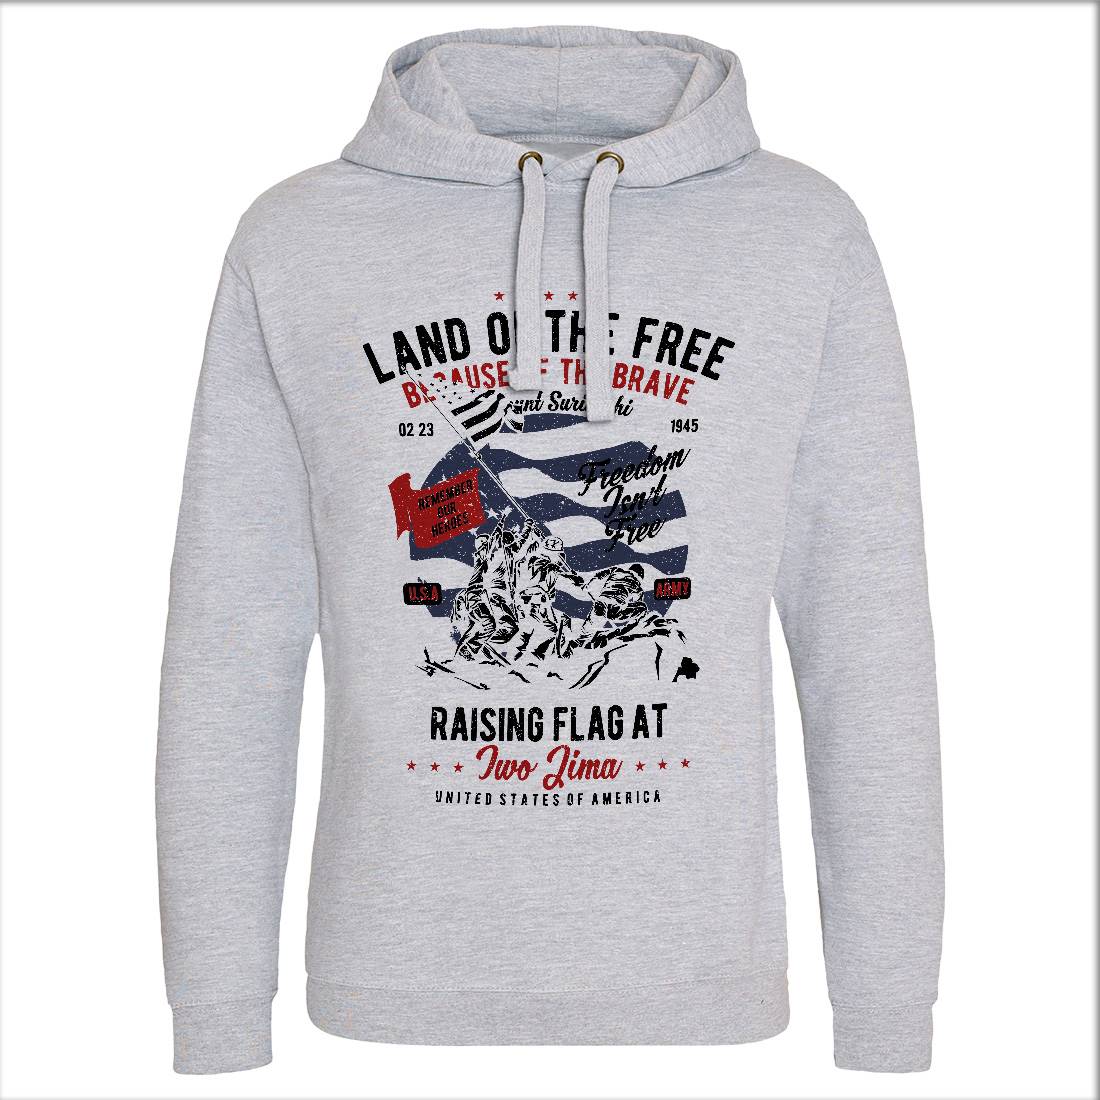 Land Of The Free Mens Hoodie Without Pocket Army A702